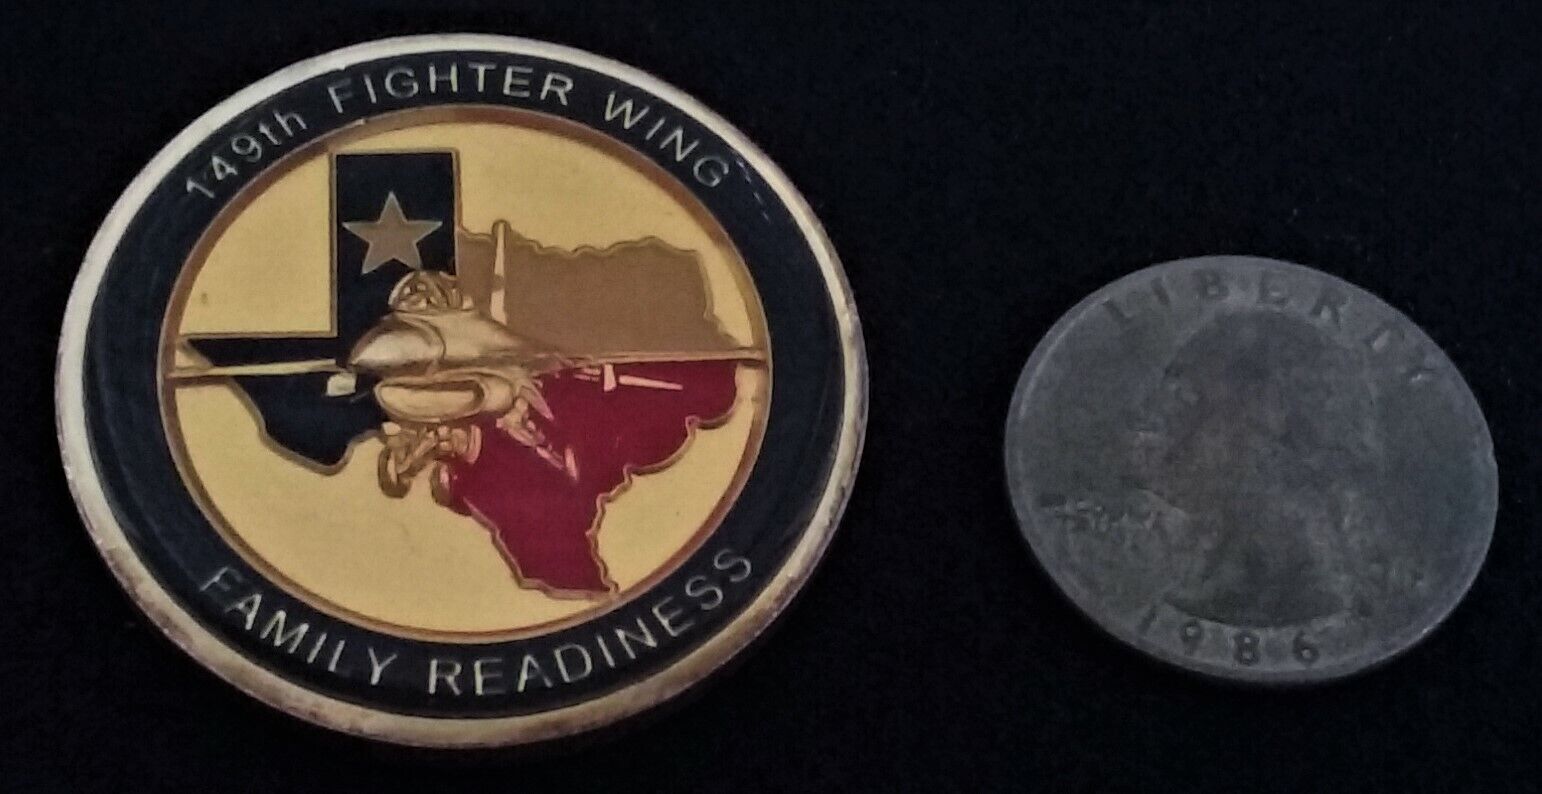 GLOSSY 149th Fighter Wing Texas F-16 Viper US Air Force USAF TX Challenge Coin